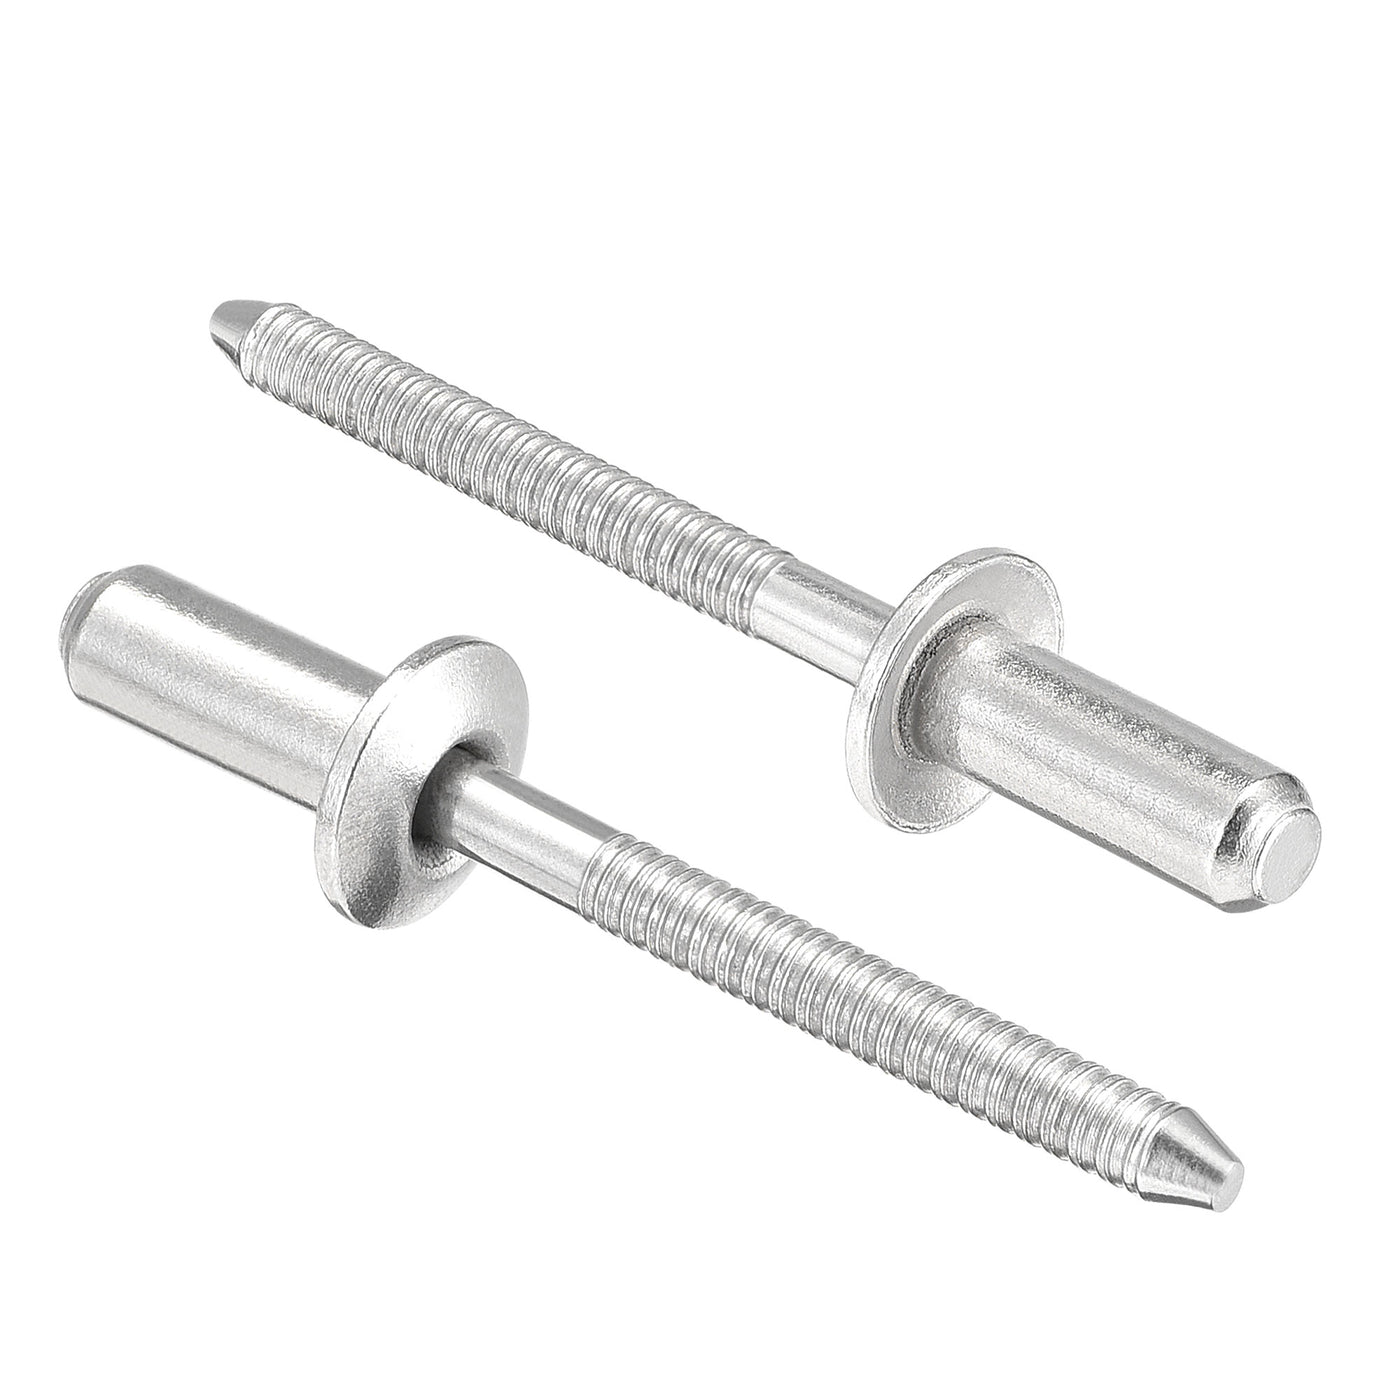 uxcell Uxcell Blind Rivets 304 Stainless Steel 4.8mm Diameter 13mm Grip Length 25pcs